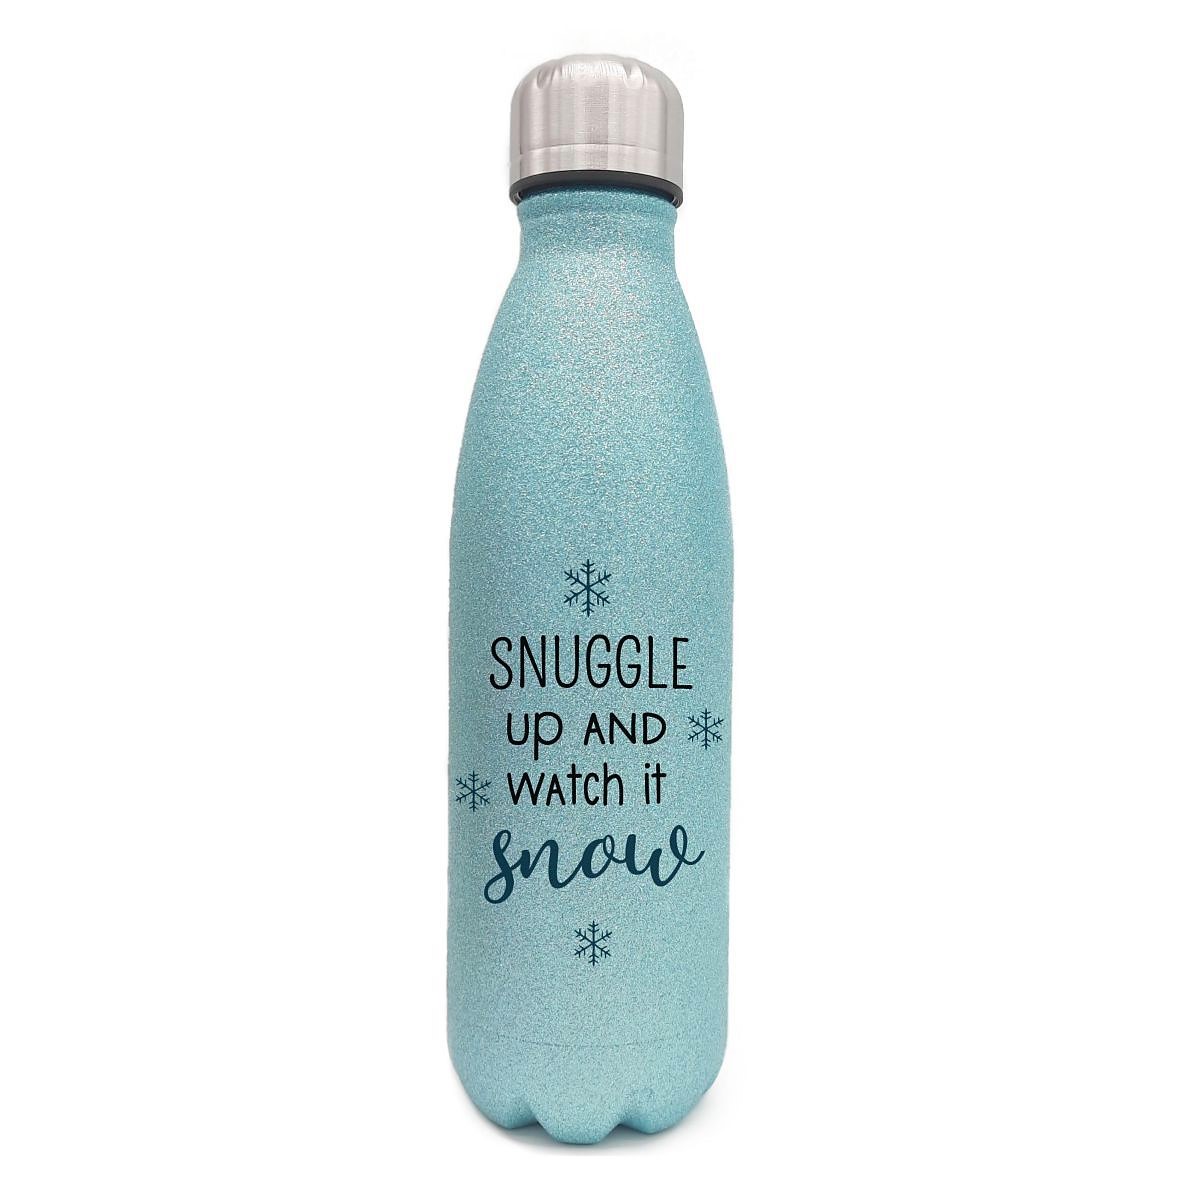 GLITZER Edelstahl Thermosflasche "Snuggle up and watch it snow"